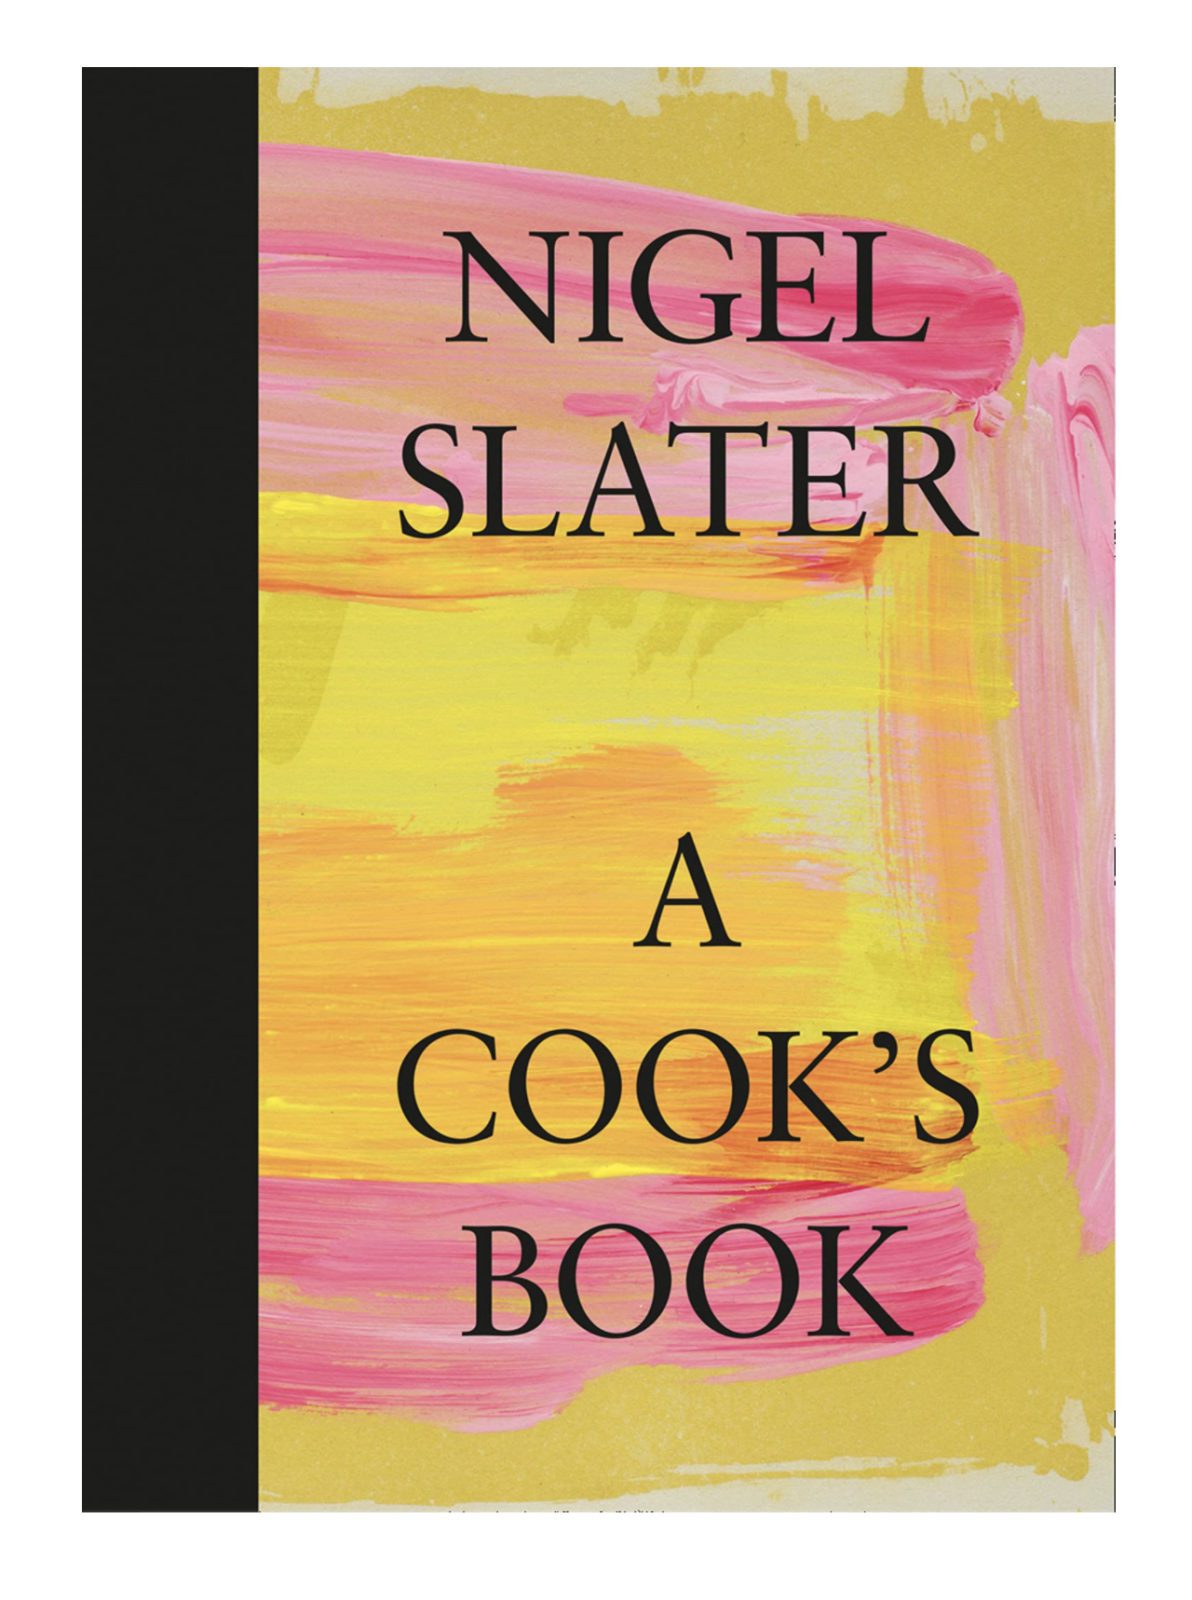 Things I Loved in February: A Cook's Book by Nigel Slater